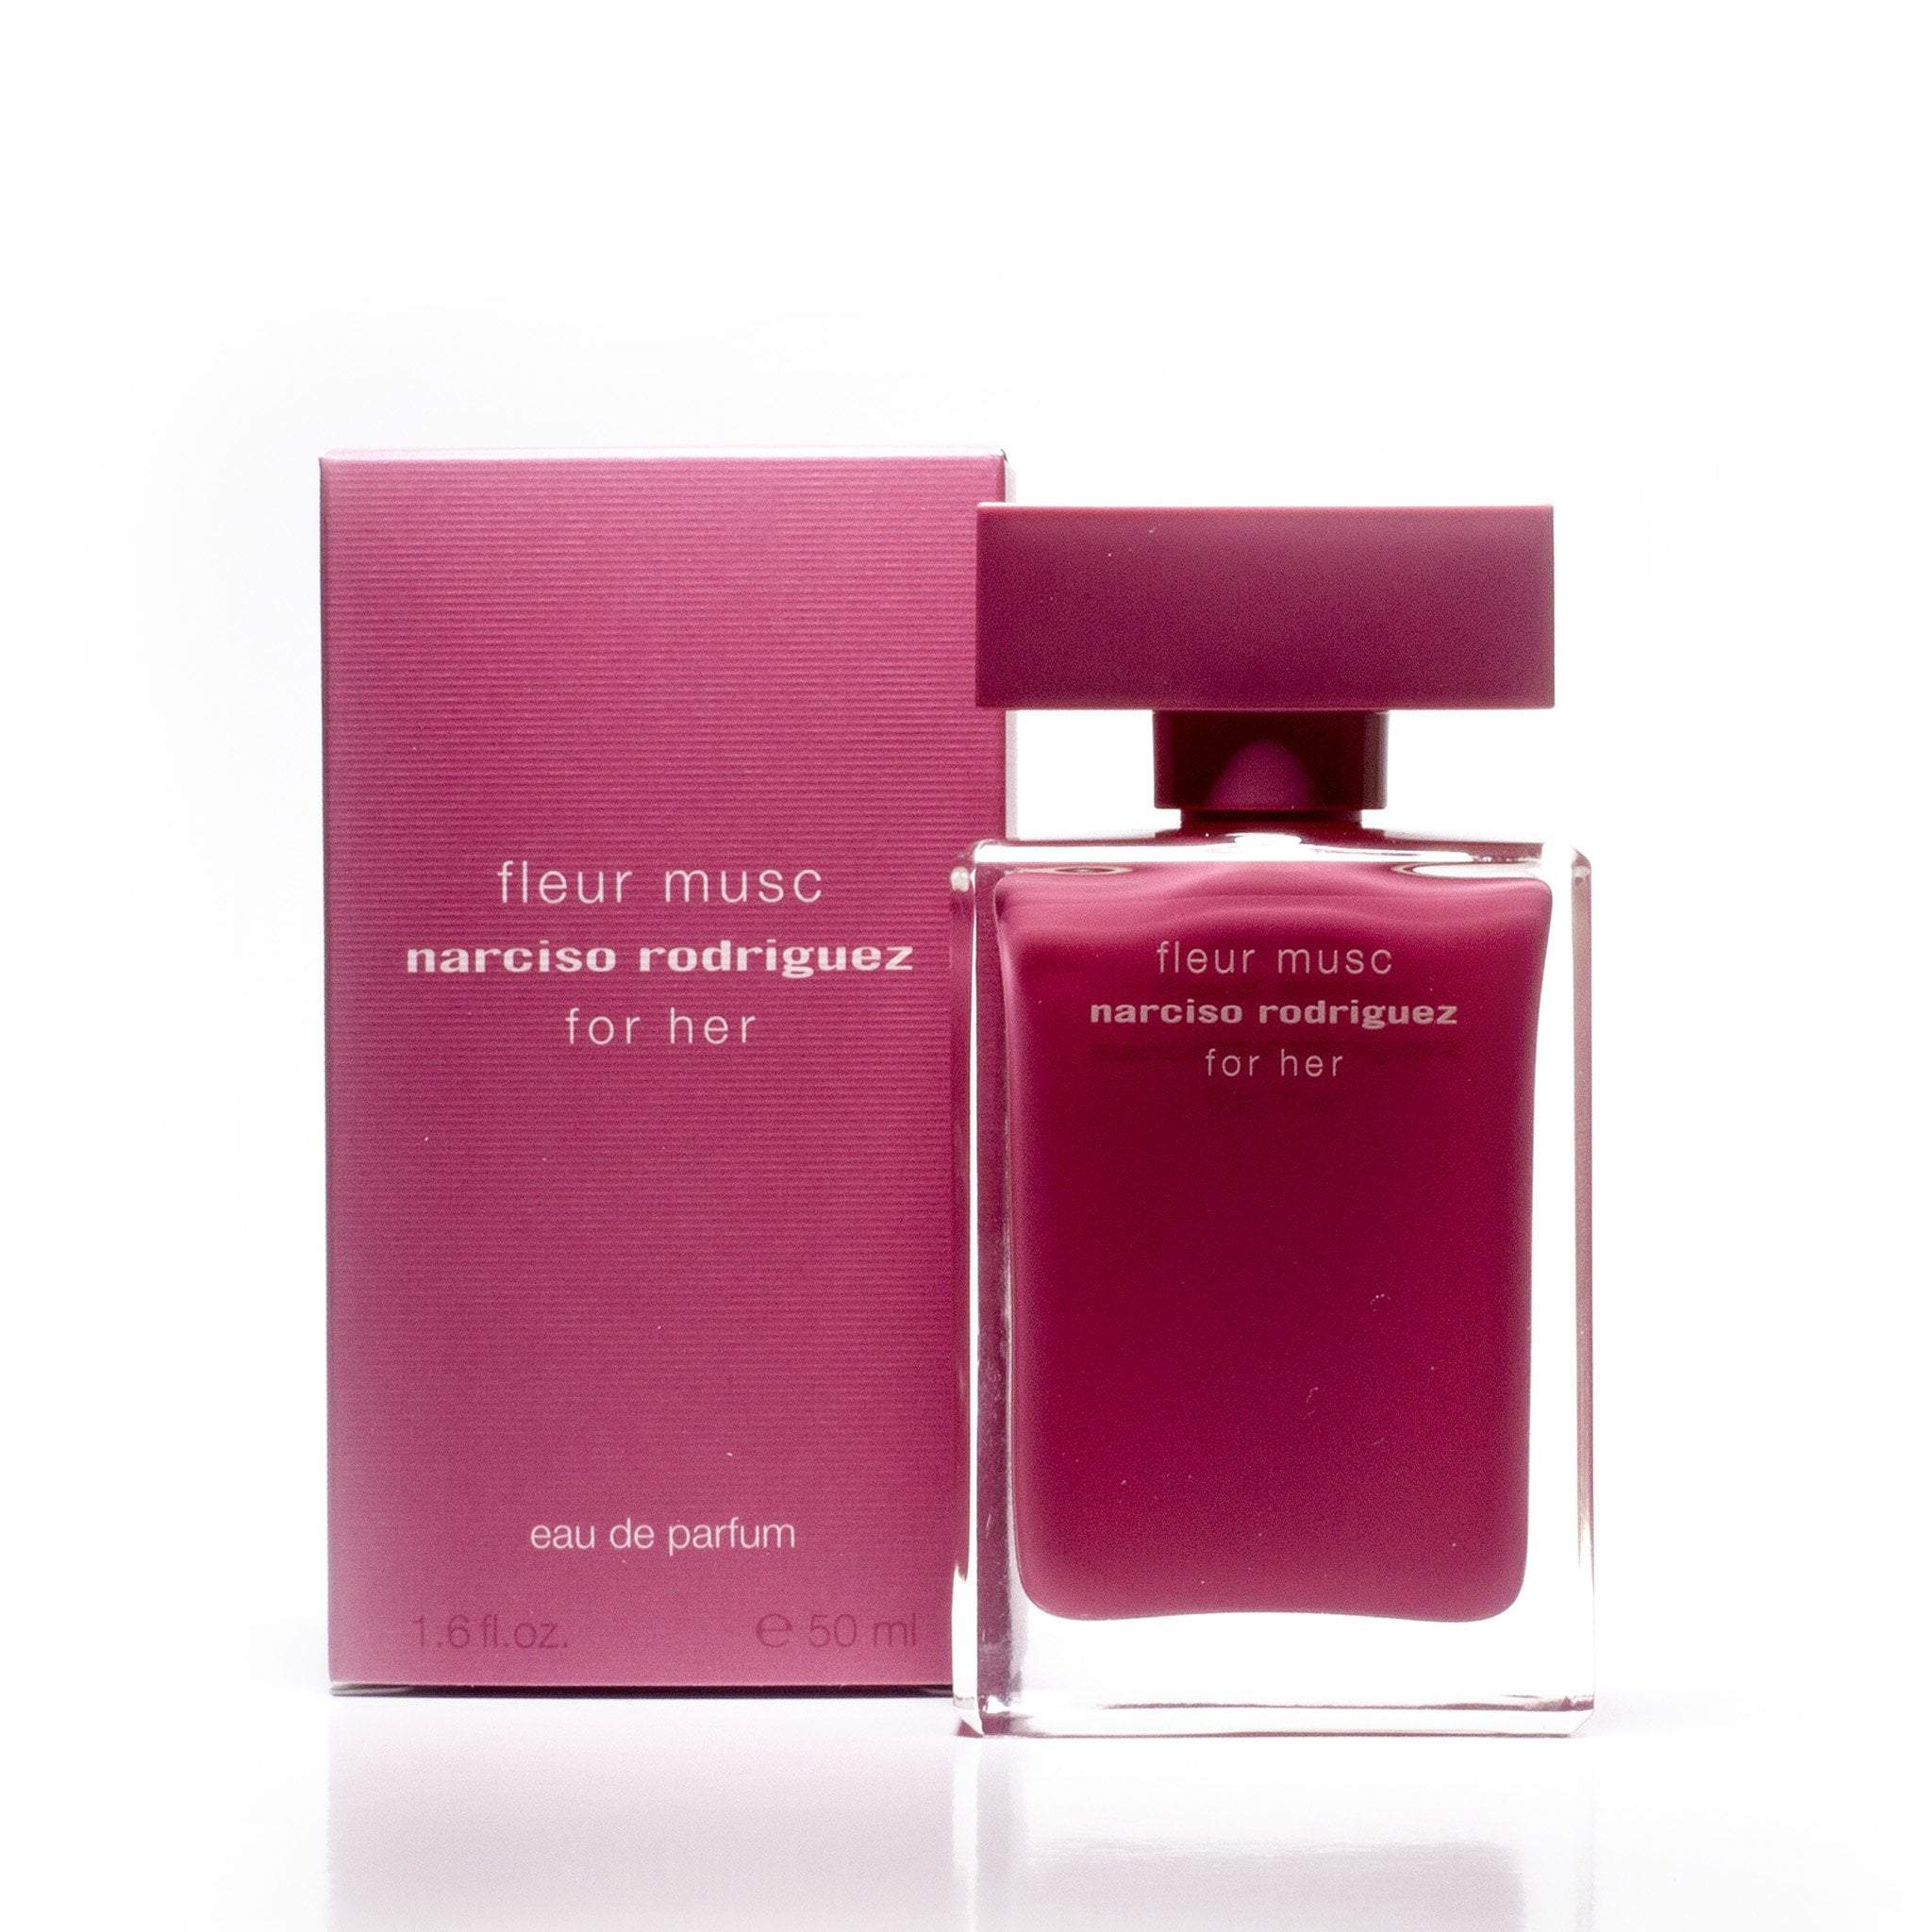 Fleur Musc Narciso Rodriguez for her. Narciso Rodriguez fleur Musc for her Eau de Toilette Florale. Narciso Rodriguez Musc Noir Rose for her. Narciso Rodriguez logo.